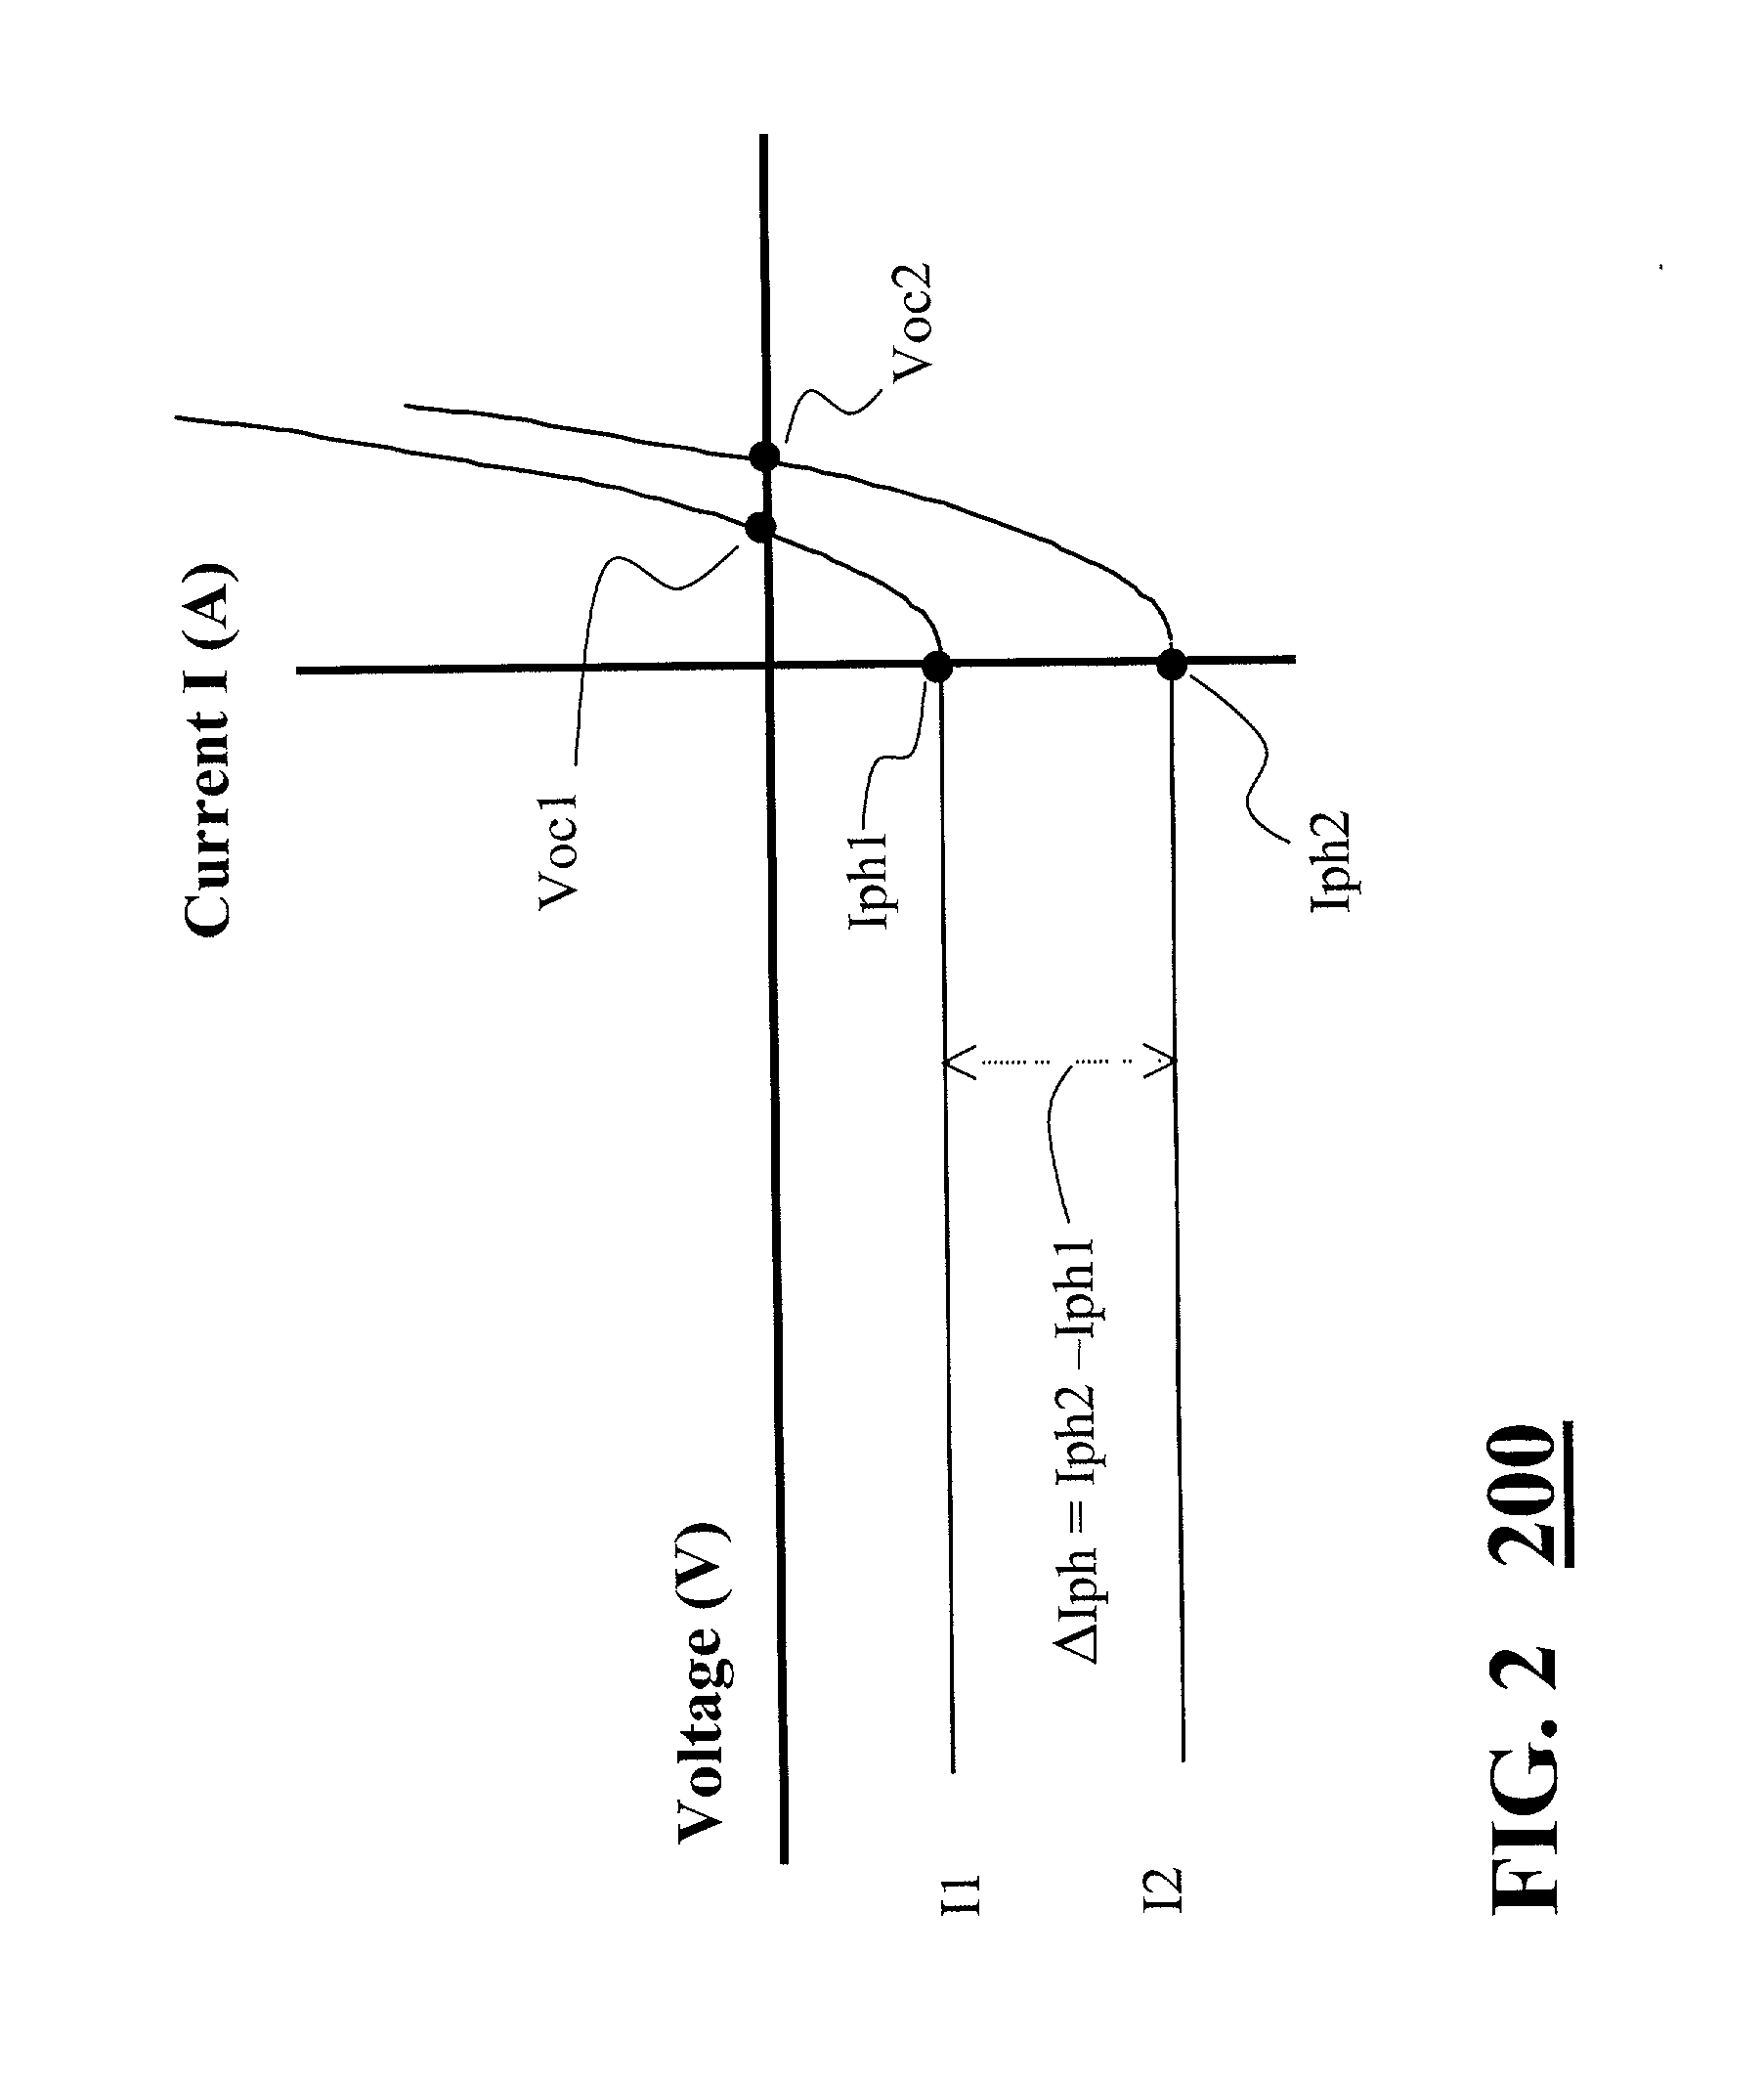 Method for determining photodiode performance parameters